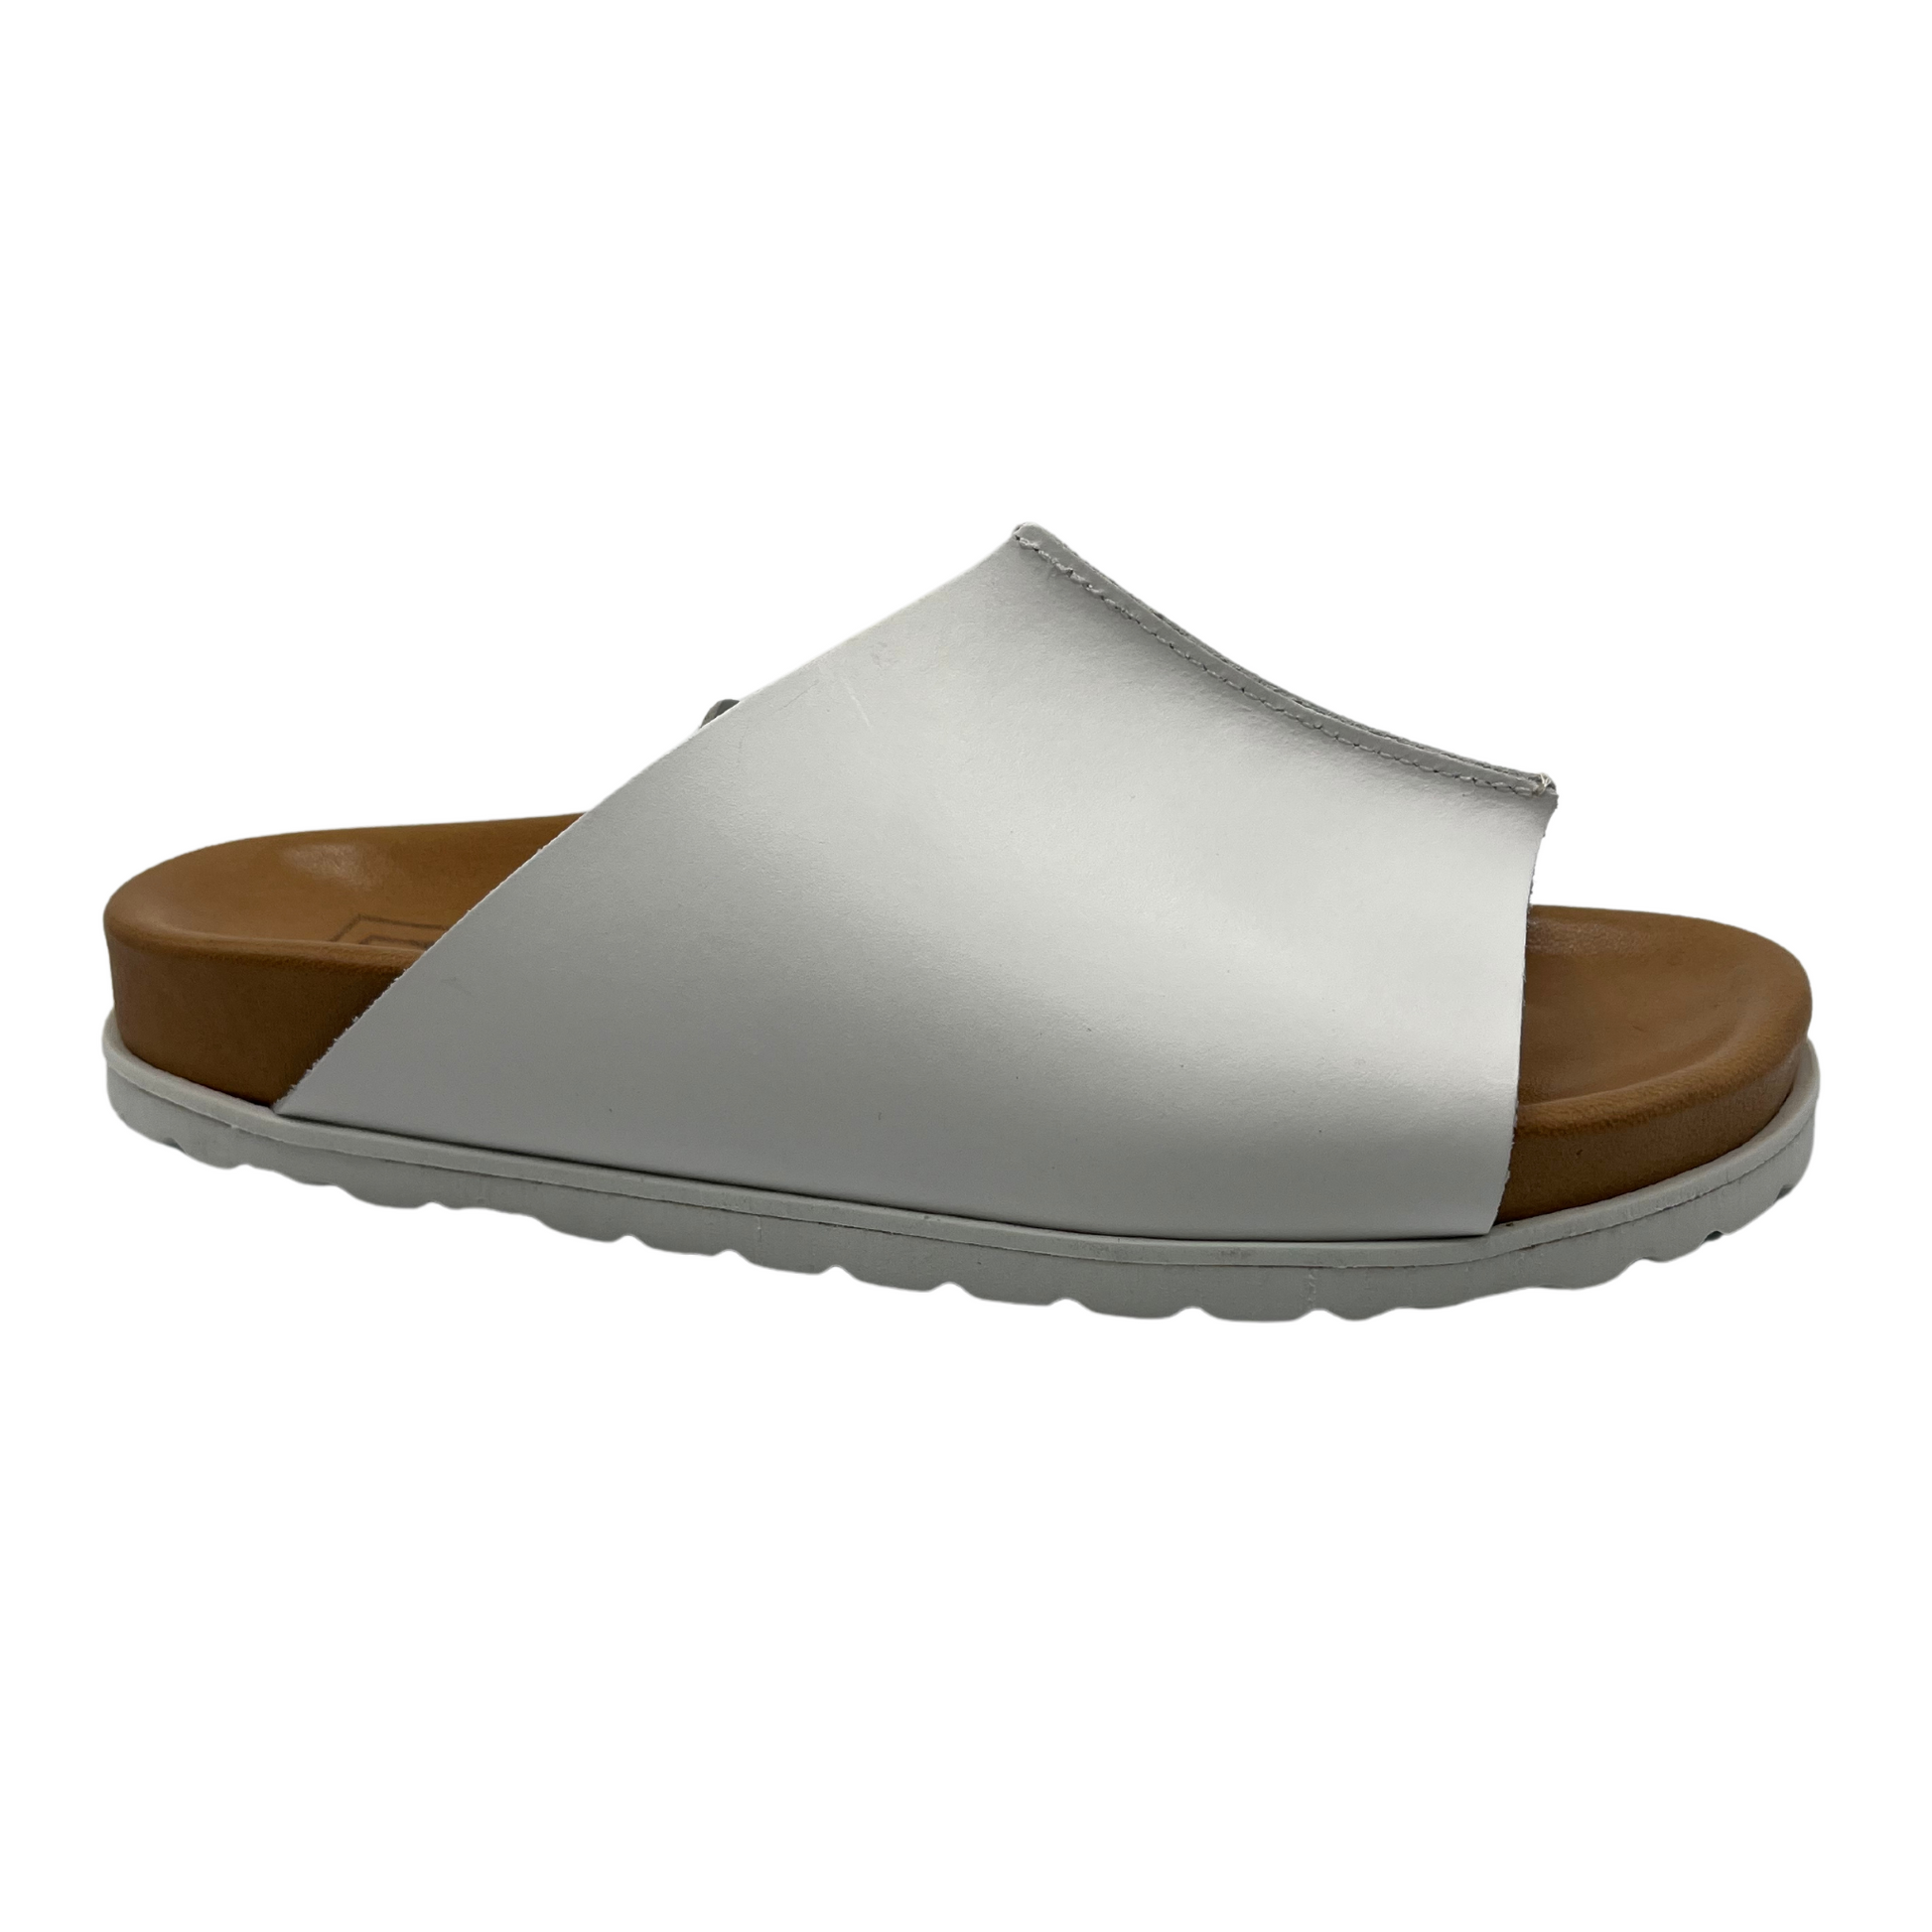 45 degree angled view of white leather slide on sandal with brown lined contoured footbed